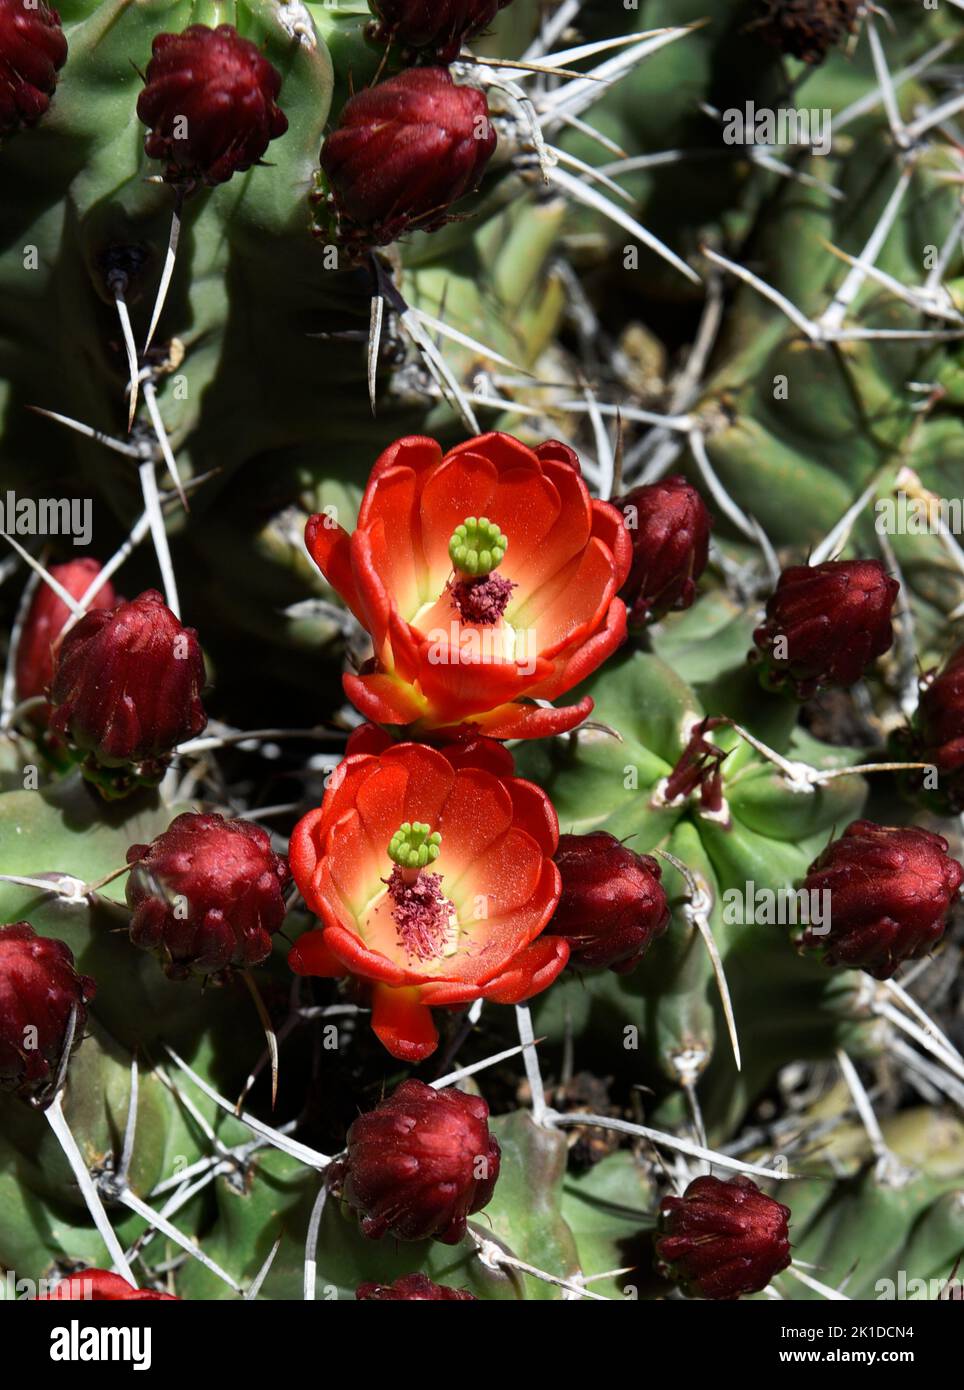 A claretcup cactus (Echinocereus triglochidiatus), a species of hedgehog cactus also known as kingcup cactus, blooms in New Mexico. Stock Photo